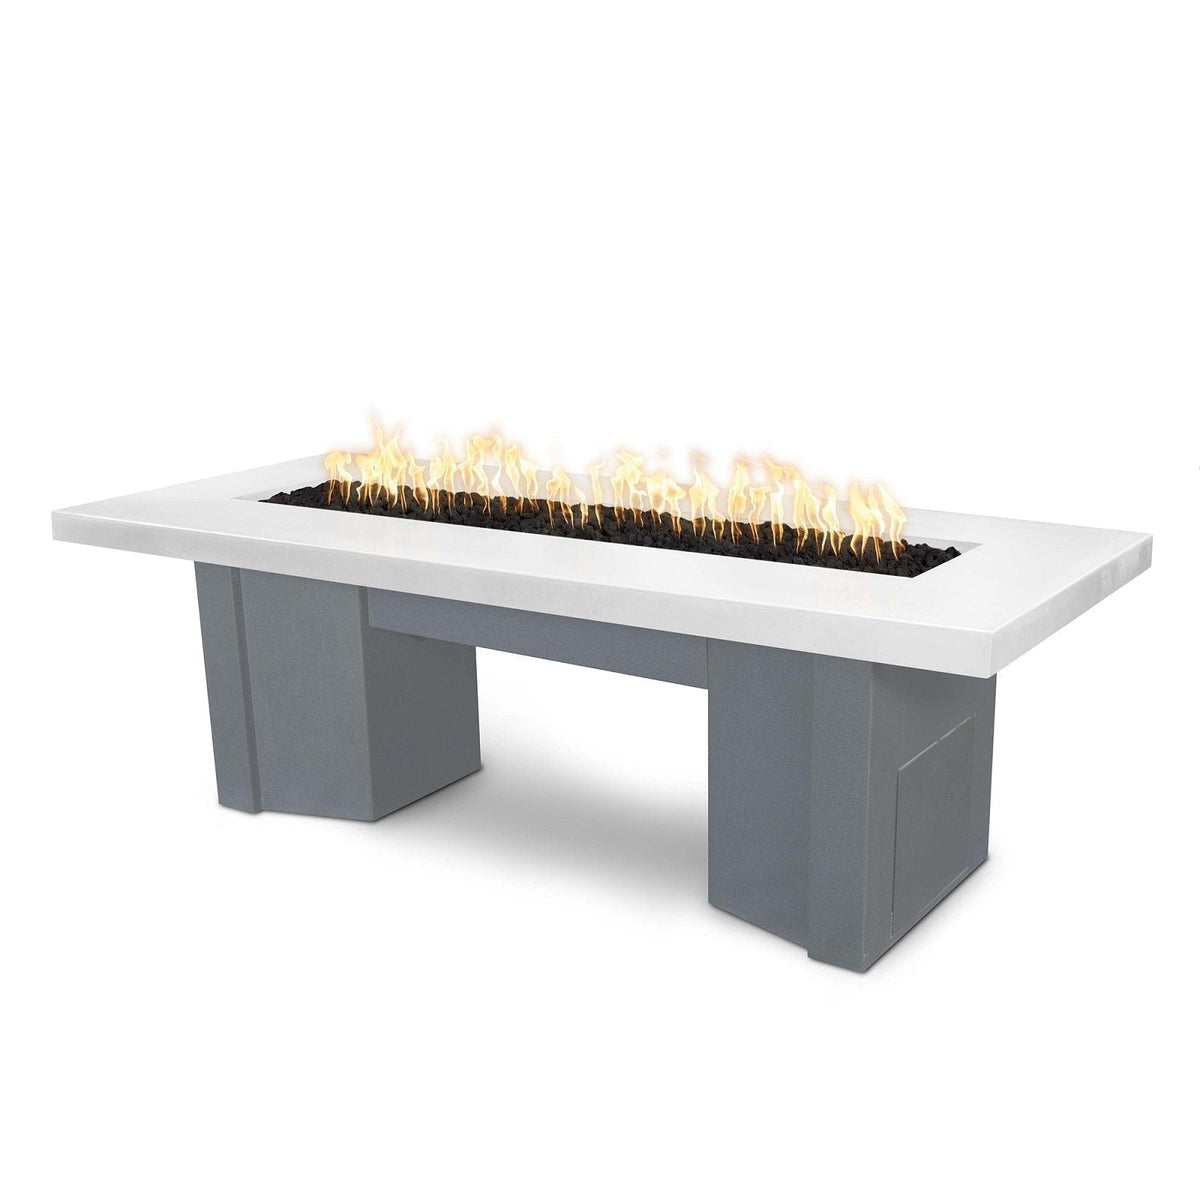 The Outdoor Plus Fire Features Limestone (-LIM) / Gray Powder Coated Steel (-GRY) The Outdoor Plus 78&quot; Alameda Fire Table Smooth Concrete in Liquid Propane - Flame Sense System with Push Button Spark Igniter / OPT-ALMGFRC78FSEN-LP